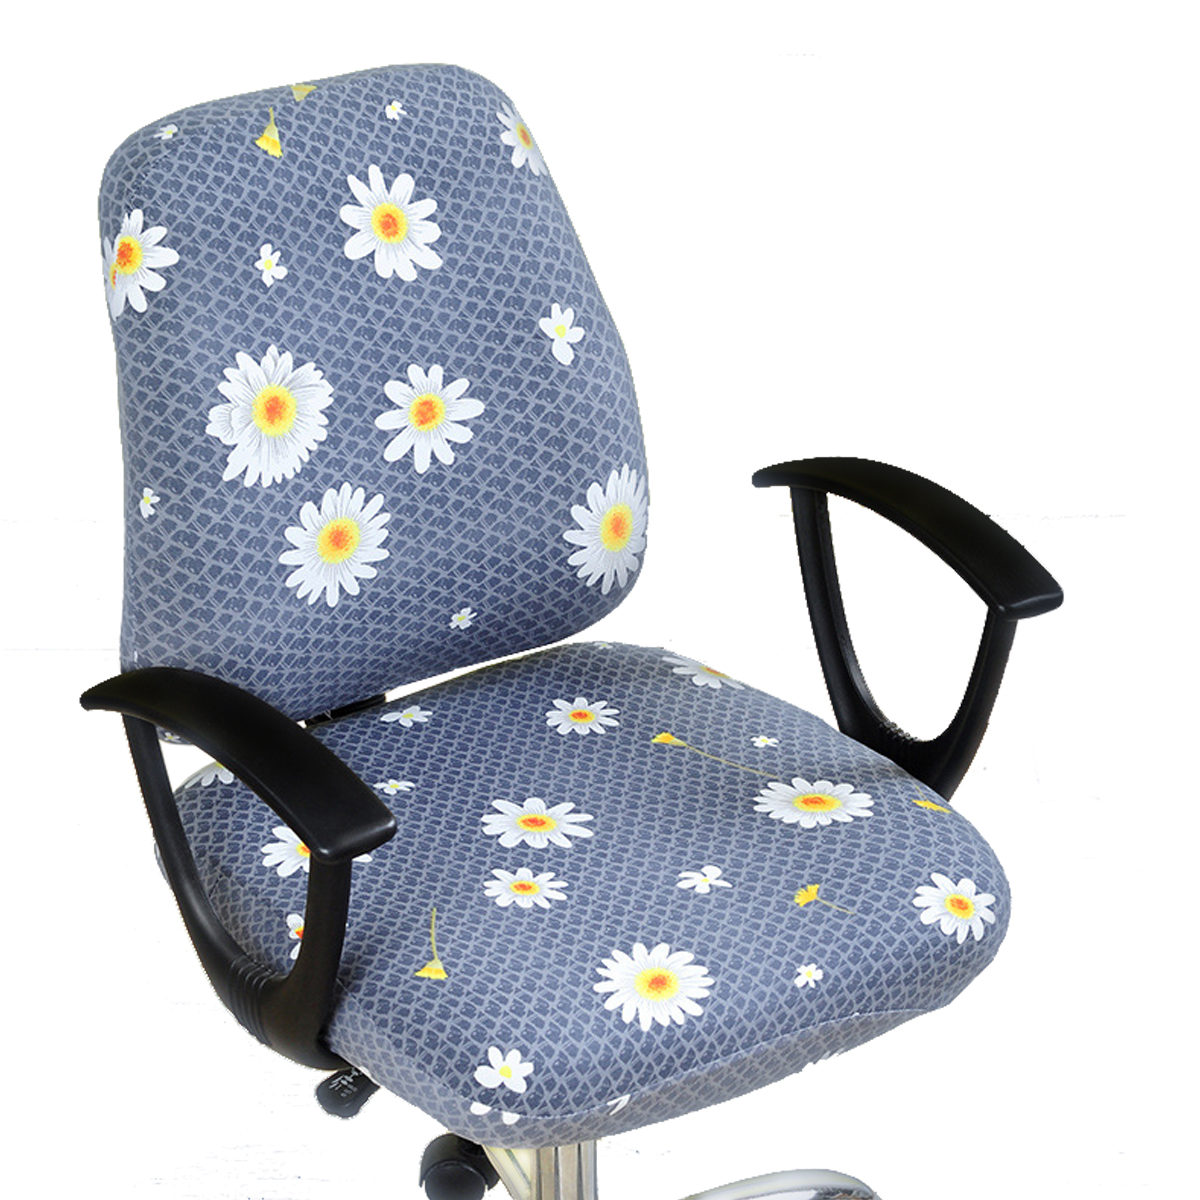 Stretch Jacquard Office Computer Chair Seat Cover, Removable | Washable | Anti-dust | Easy to Put-on, Chair Not Included - image 2 of 7